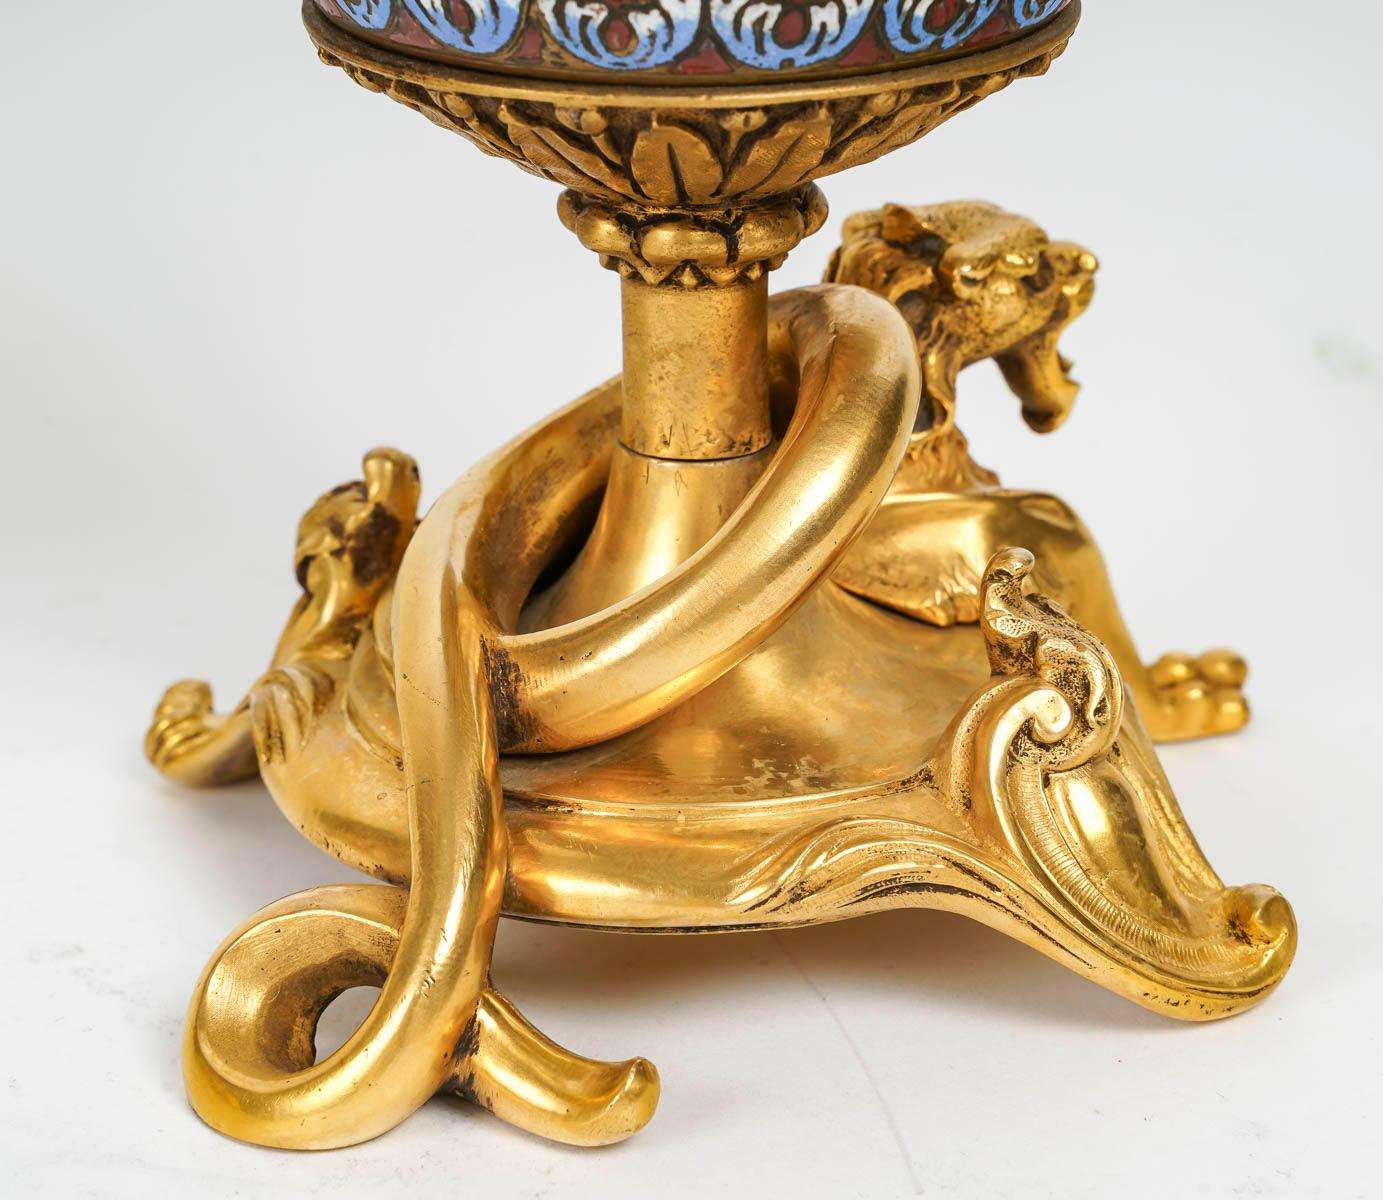 Pair of Ewers in Chased and Gilt Bronze, Neo-Gothic Style, Napoleon III Period. 1